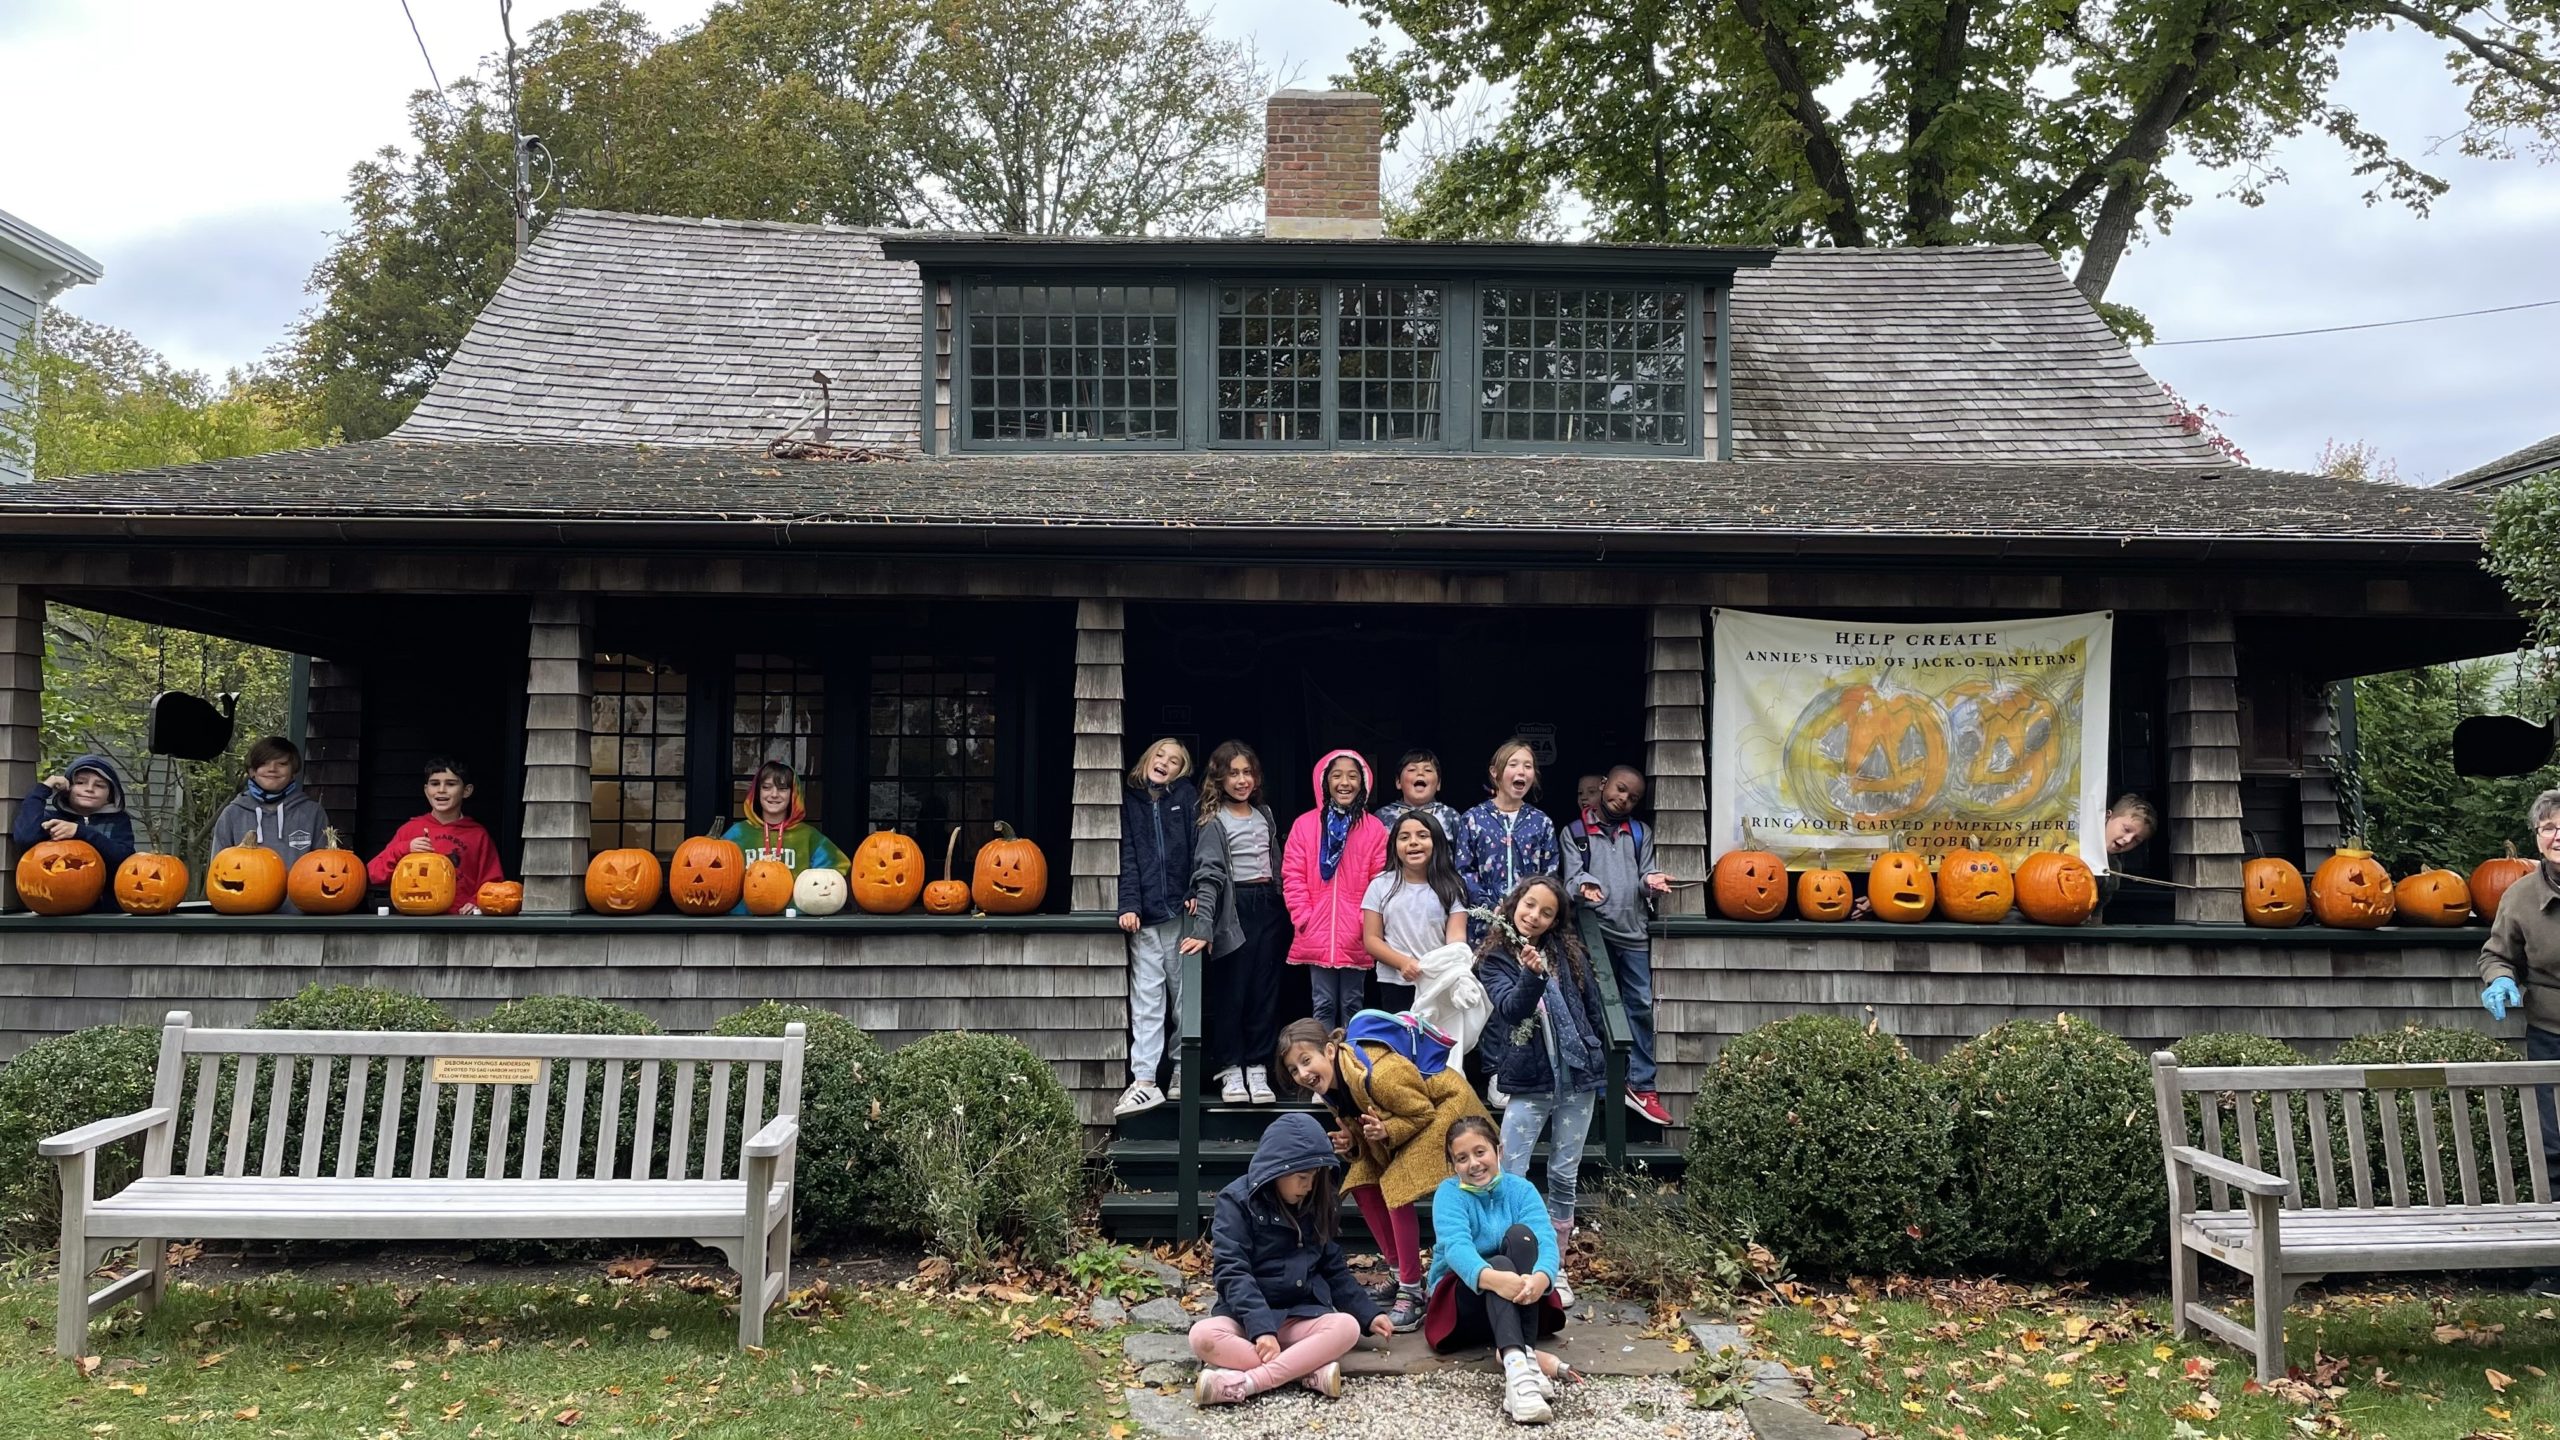 Sag Harbor Elementary School fourth graders visited the Sag Harbor Historical Society where they carved jack-o’-lanterns, which were then displayed on the porch to bring festive lights to the historic Sag Harbor community.